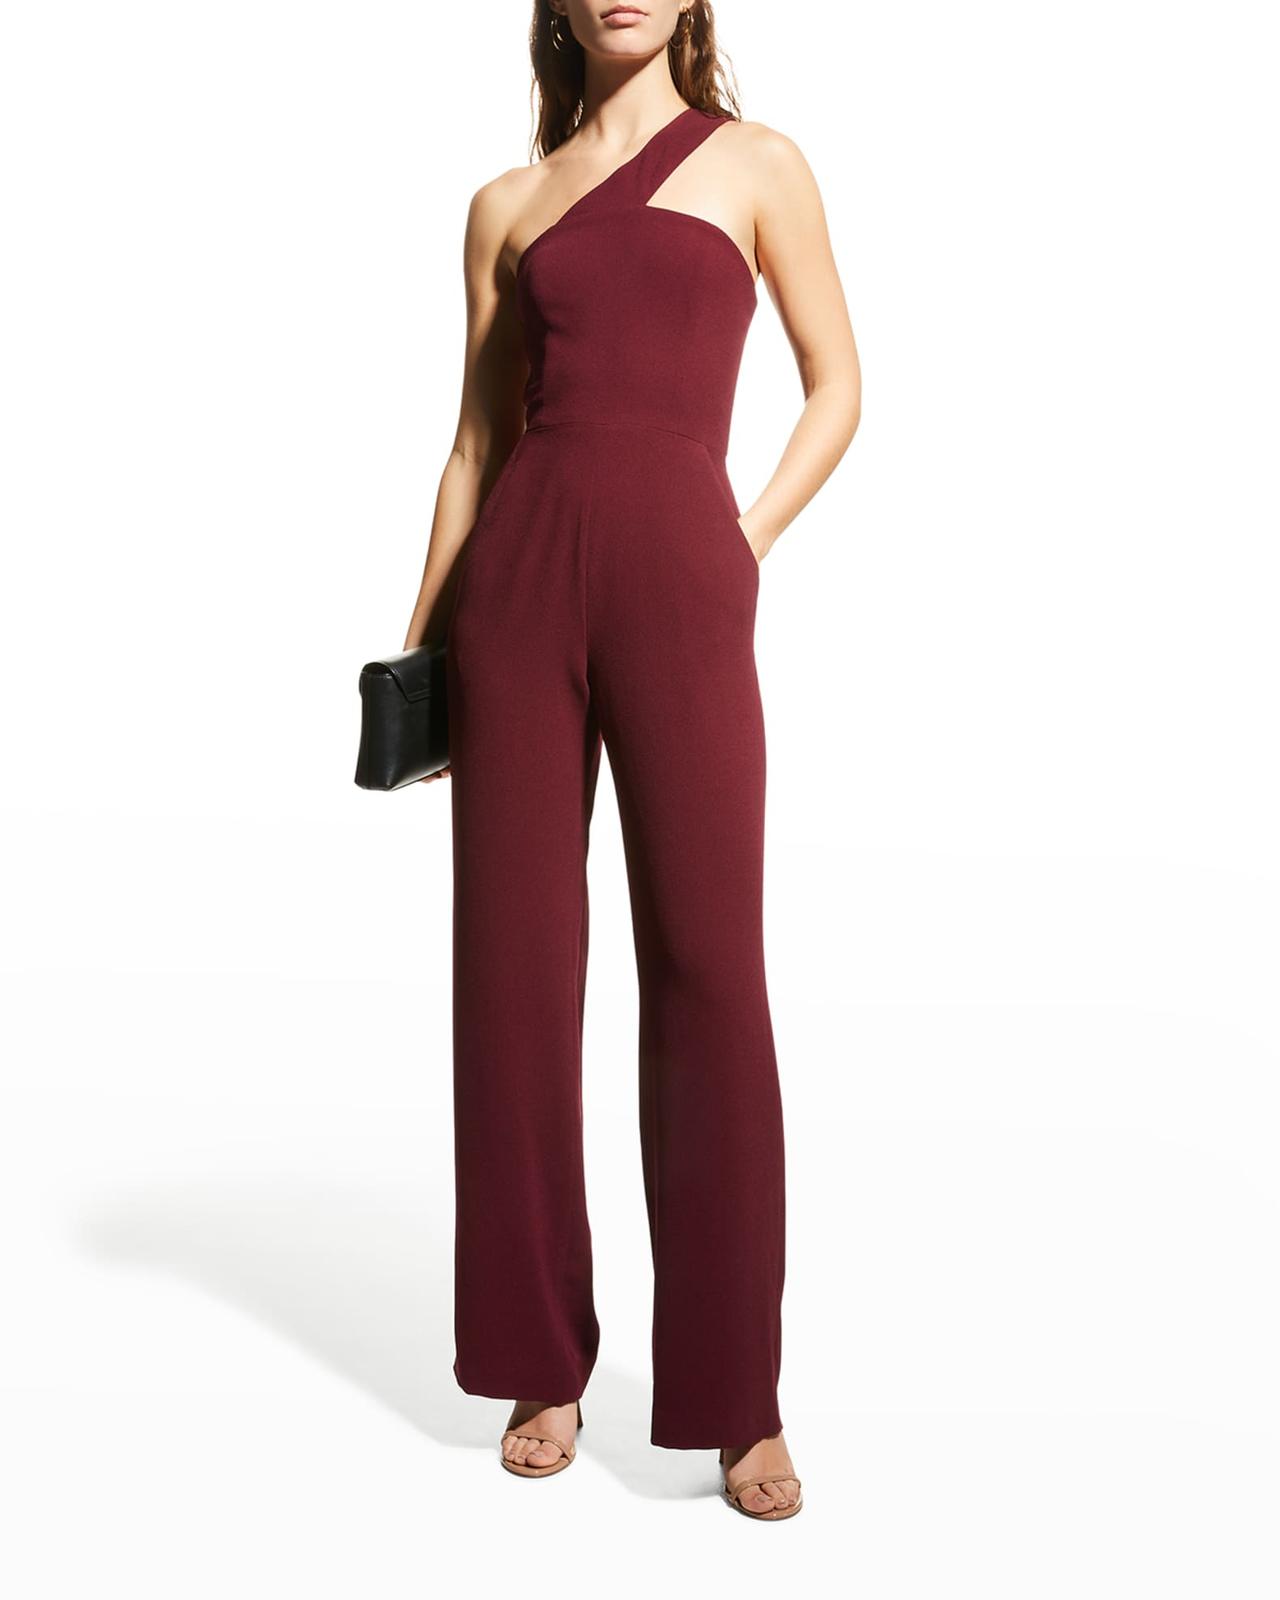 Red Crossing Back Jumpsuit Shopping Chic Summer Outfit Idea  Red jumpsuits  outfit, Chic summer outfits, Jumpsuit outfit wedding